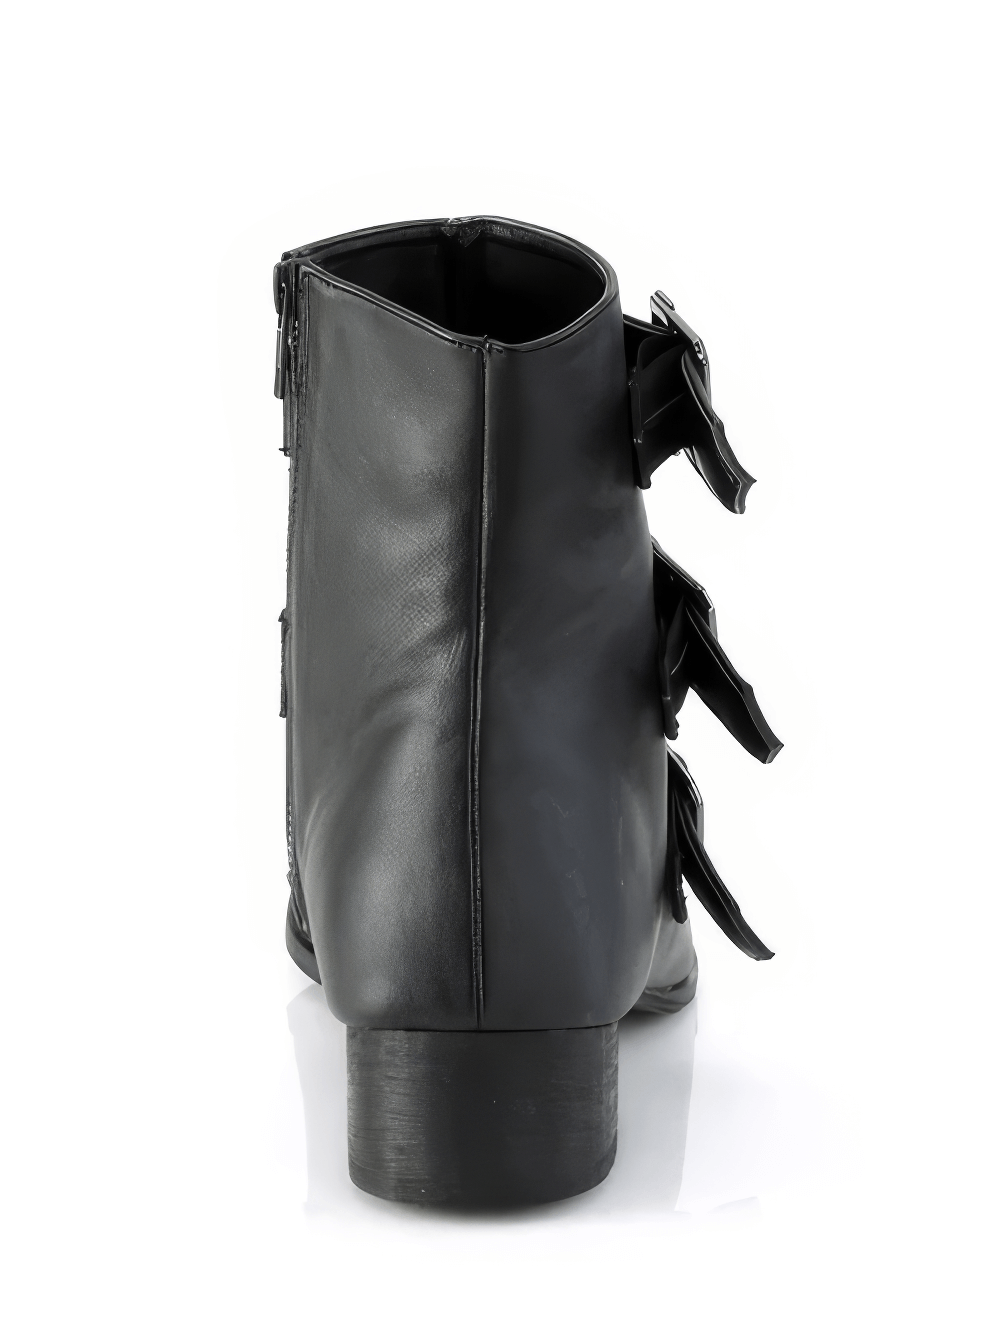 DEMONIA Shadowy Gothic Style Boots with Coffin Buckles